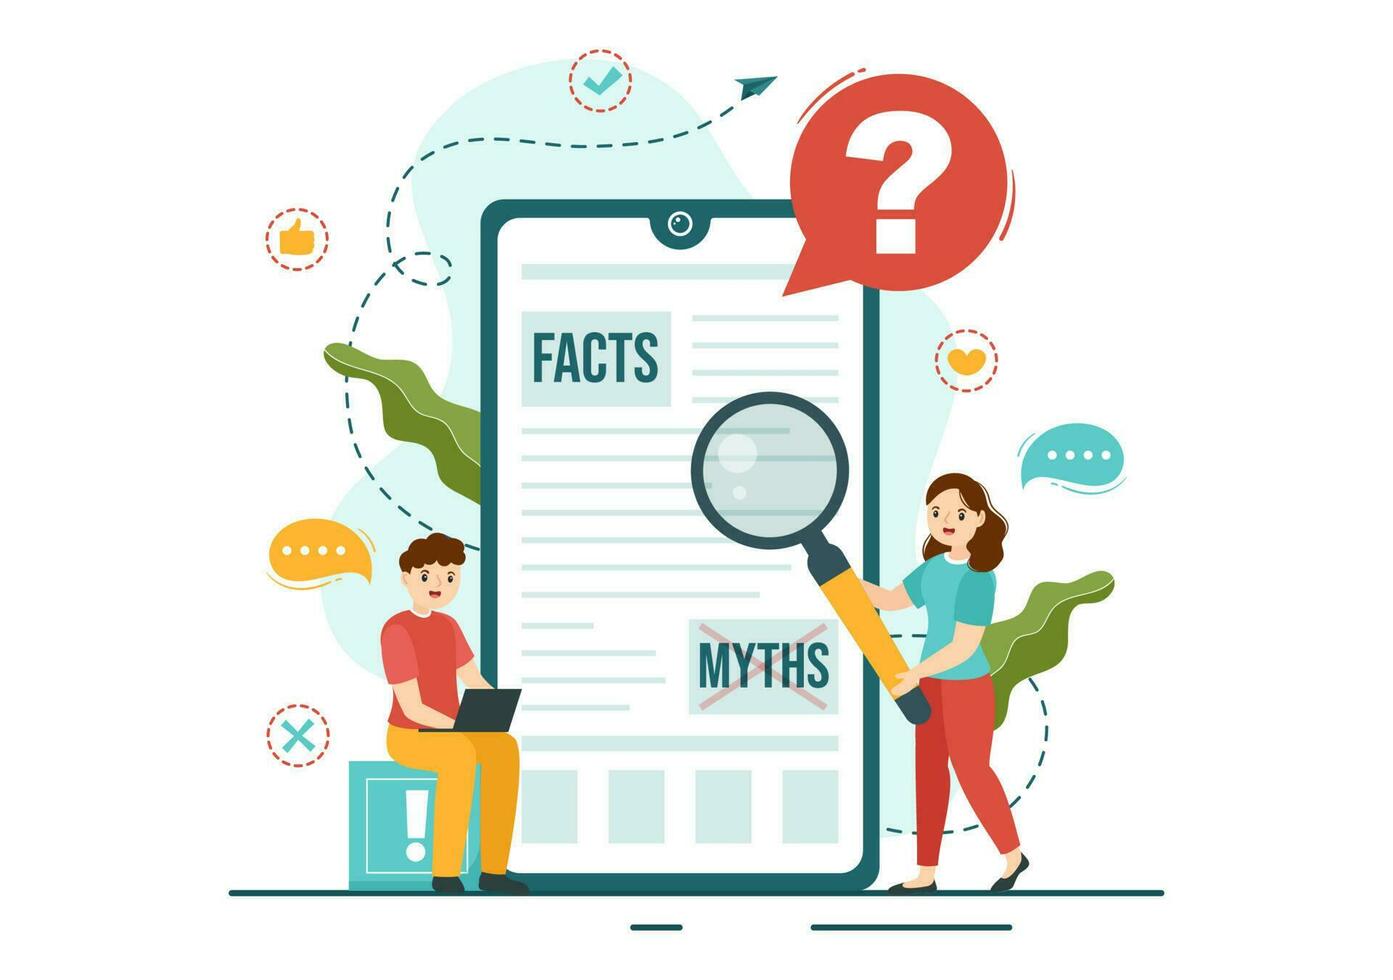 Fact Check Vector Illustration With Myths vs Facts News for Thorough Checking or Compare Evidence in Flat Cartoon Hand Drawn Landing Page Templates